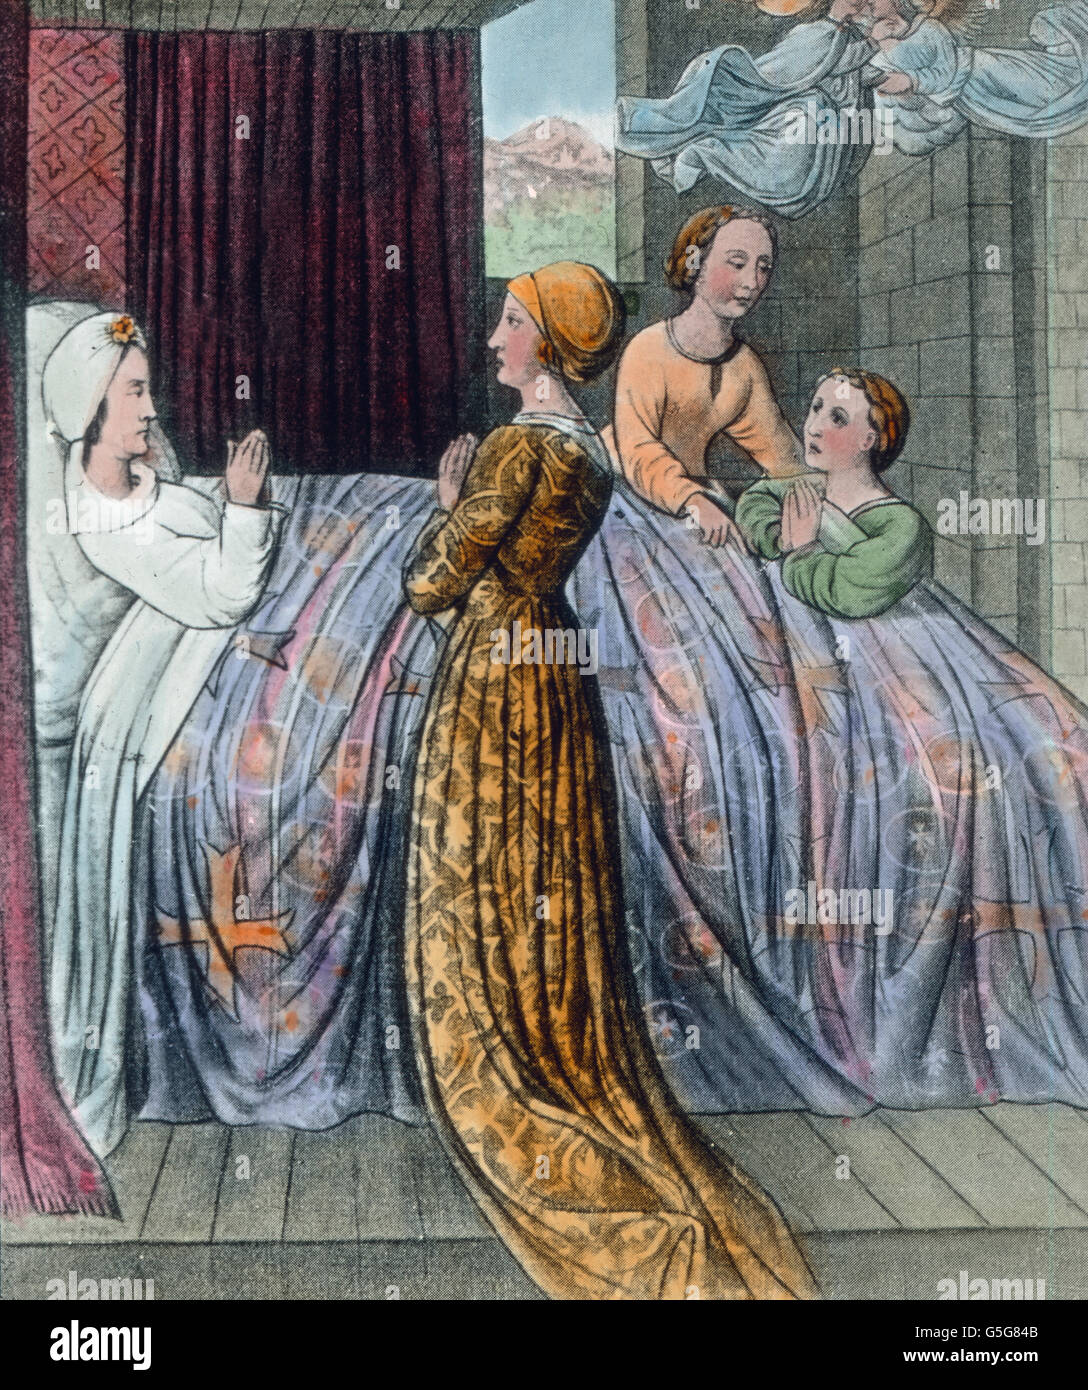 Elisabeths Tod. Death of St. Elizabeth. dying, bed, bedroom, mourners, mourning, praying, prayer, Saint Elizabeth of Hungary, history, historical, illustration, 1910s, 1920s, 20th century, archive, Carl Simon, hand coloured glass slide Stock Photo